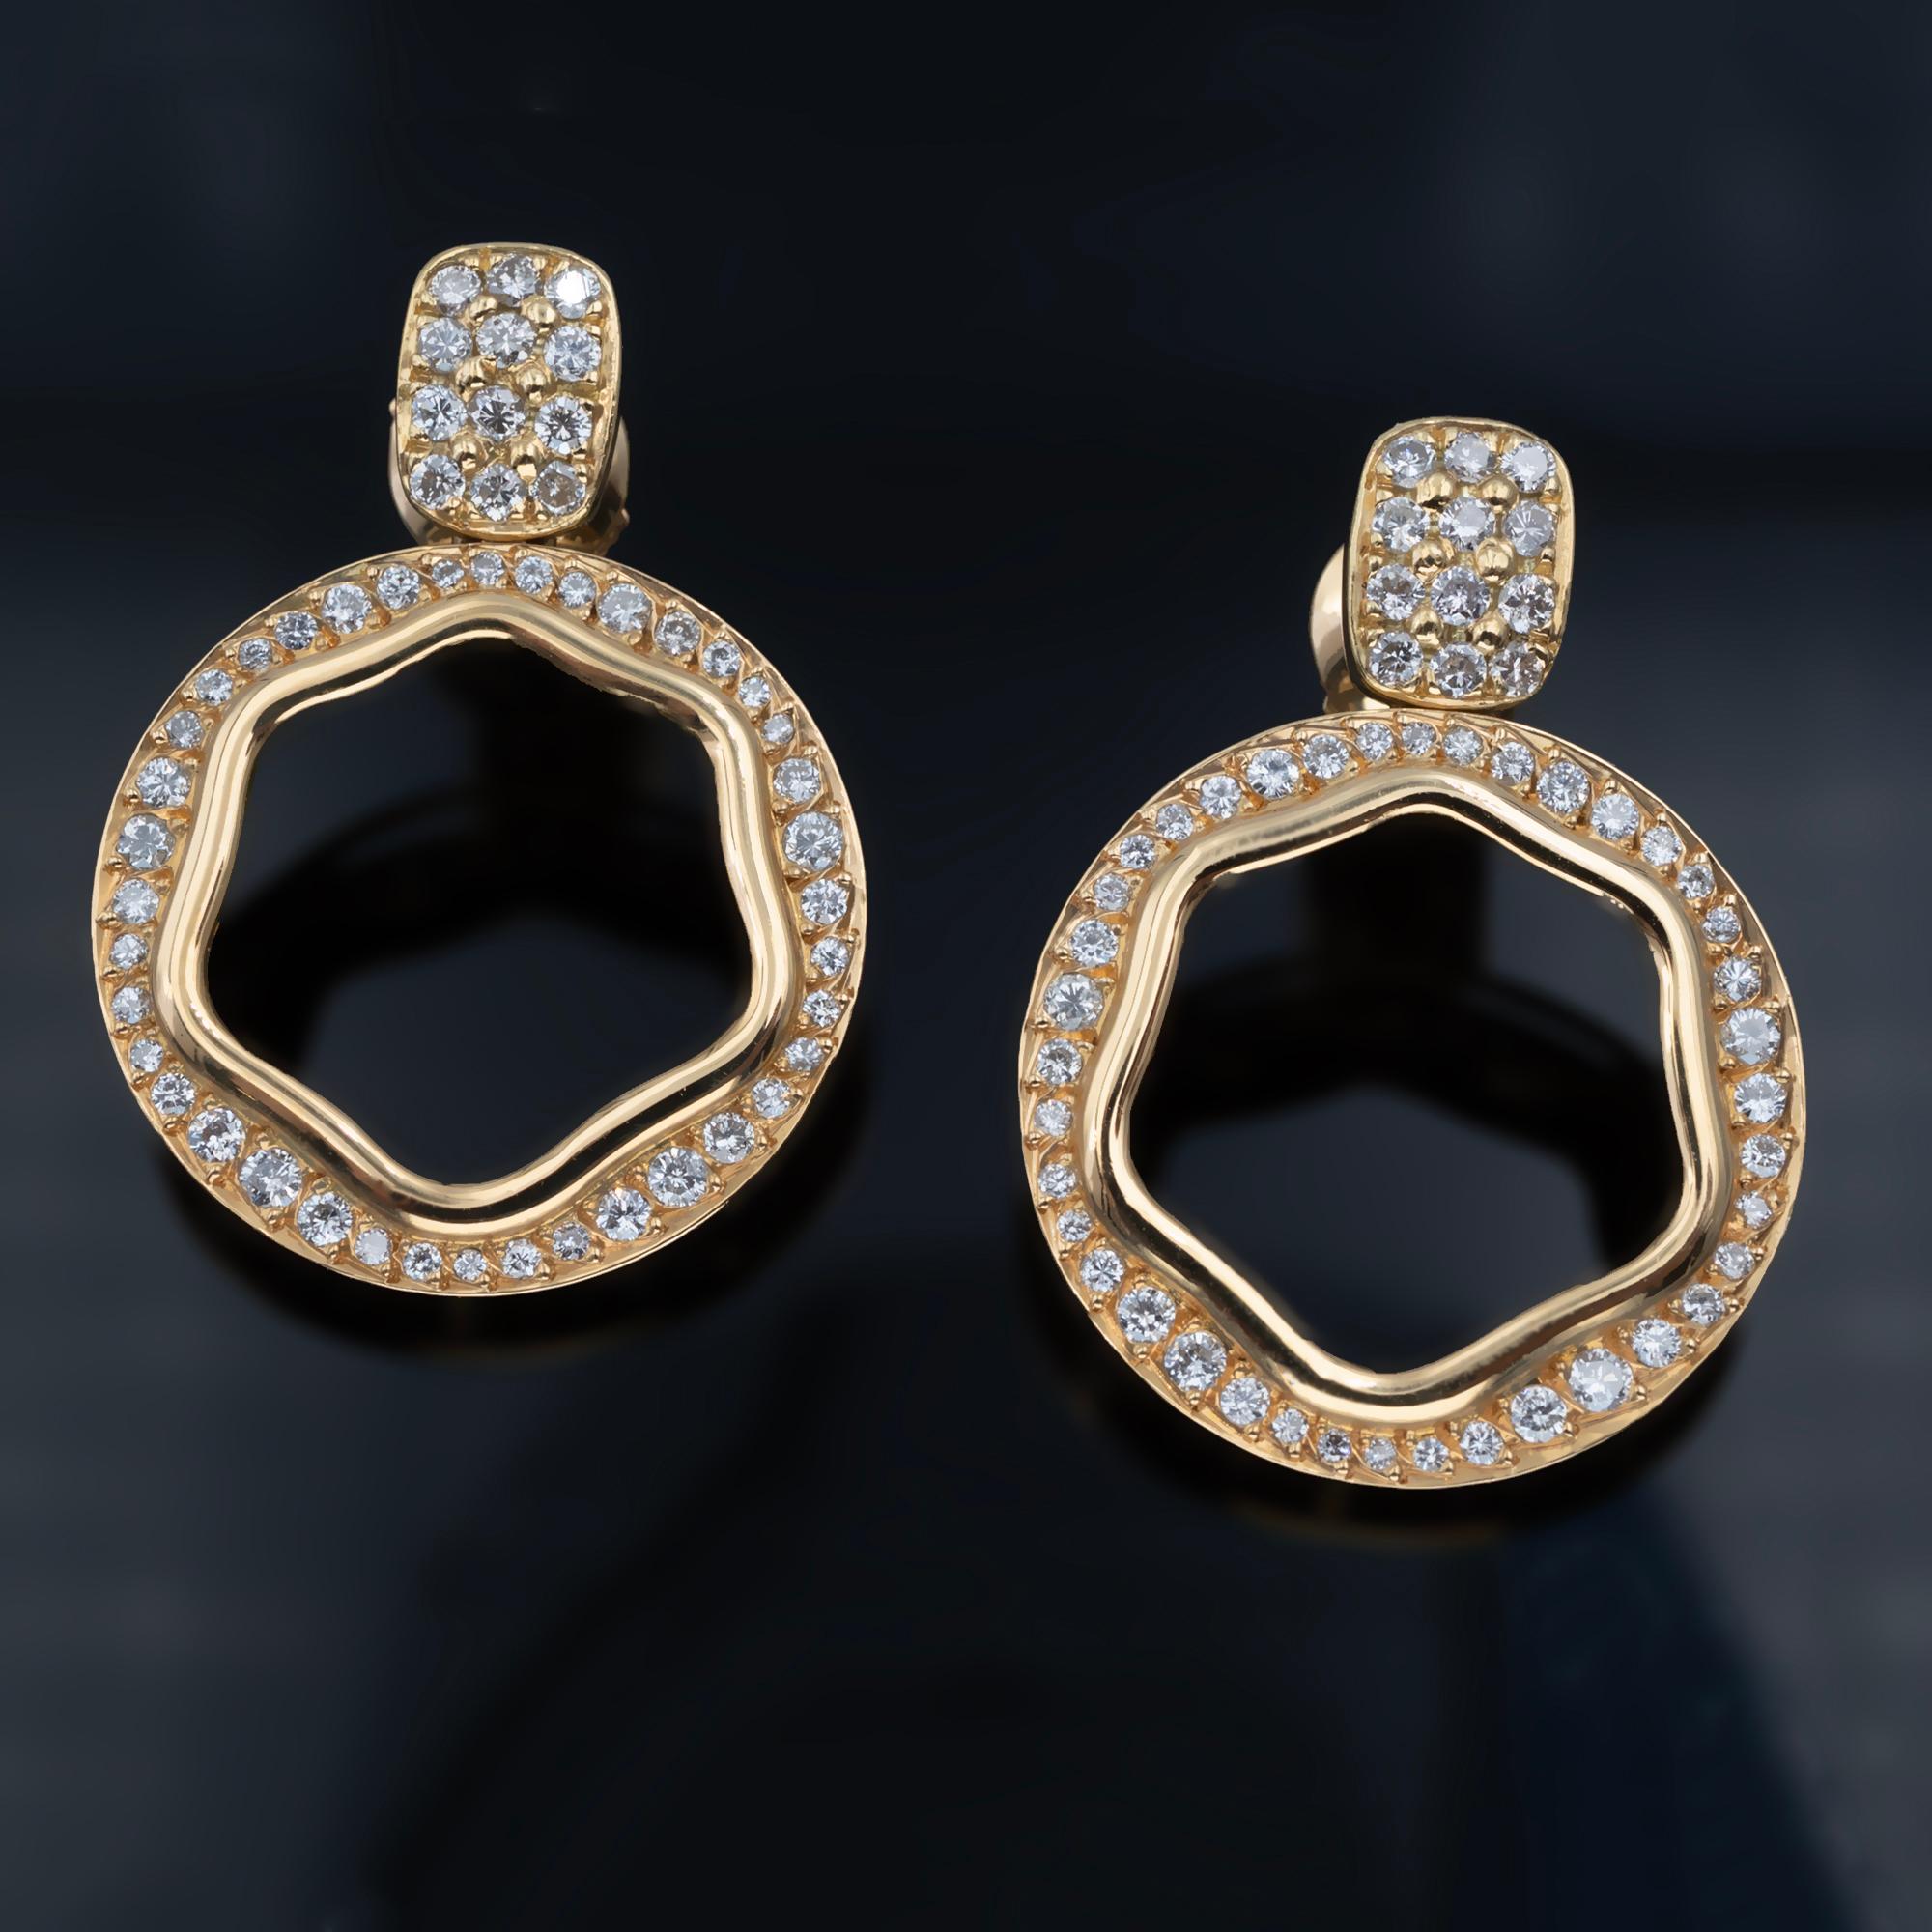 Introducing our chic 18-karat gold and diamond earrings, the perfect blend of style and sophistication. 
These earrings feature a circular shape delicately dangling from a pavé-set stud, creating a trendy and eye-catching design. Adorned with